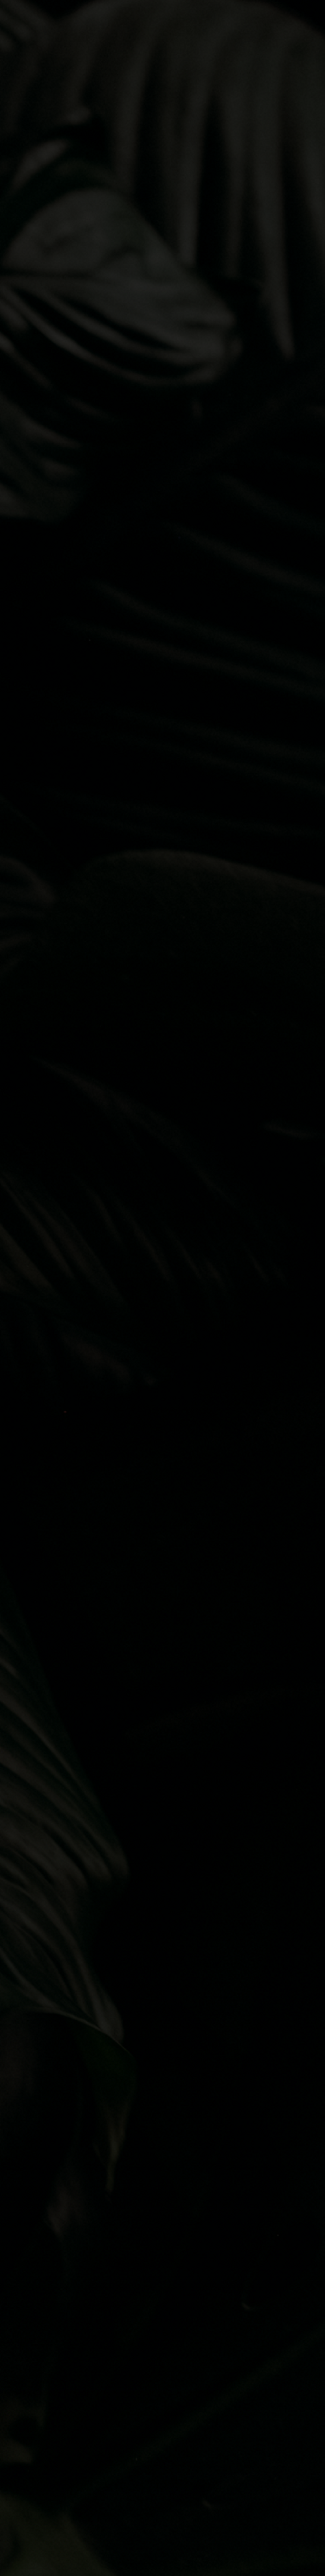 A dark image of palm fronds